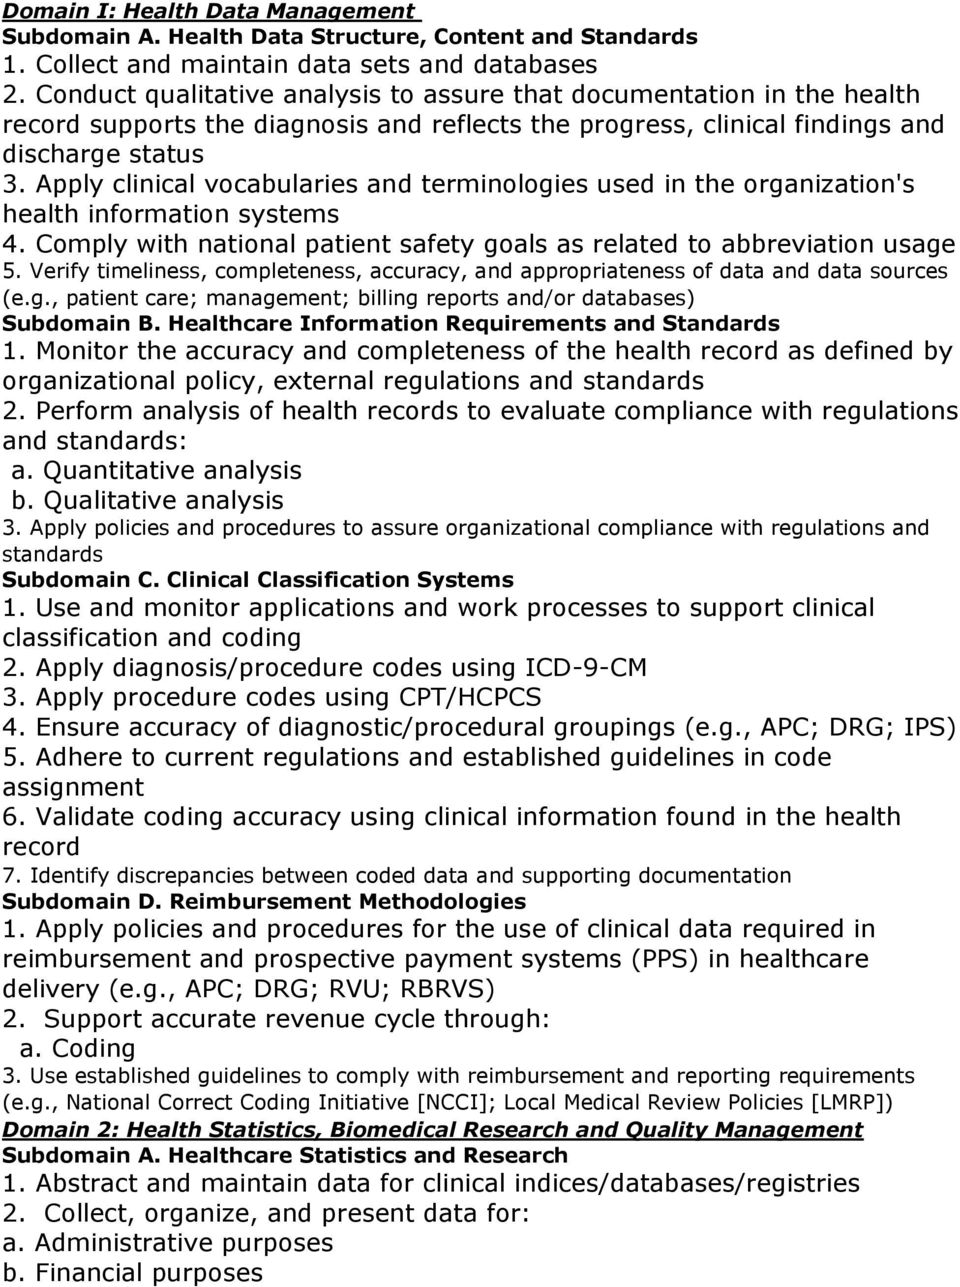 Apply clinical vocabularies and terminologies used in the organization's health information systems 4. Comply with national patient safety goals as related to abbreviation usage 5.